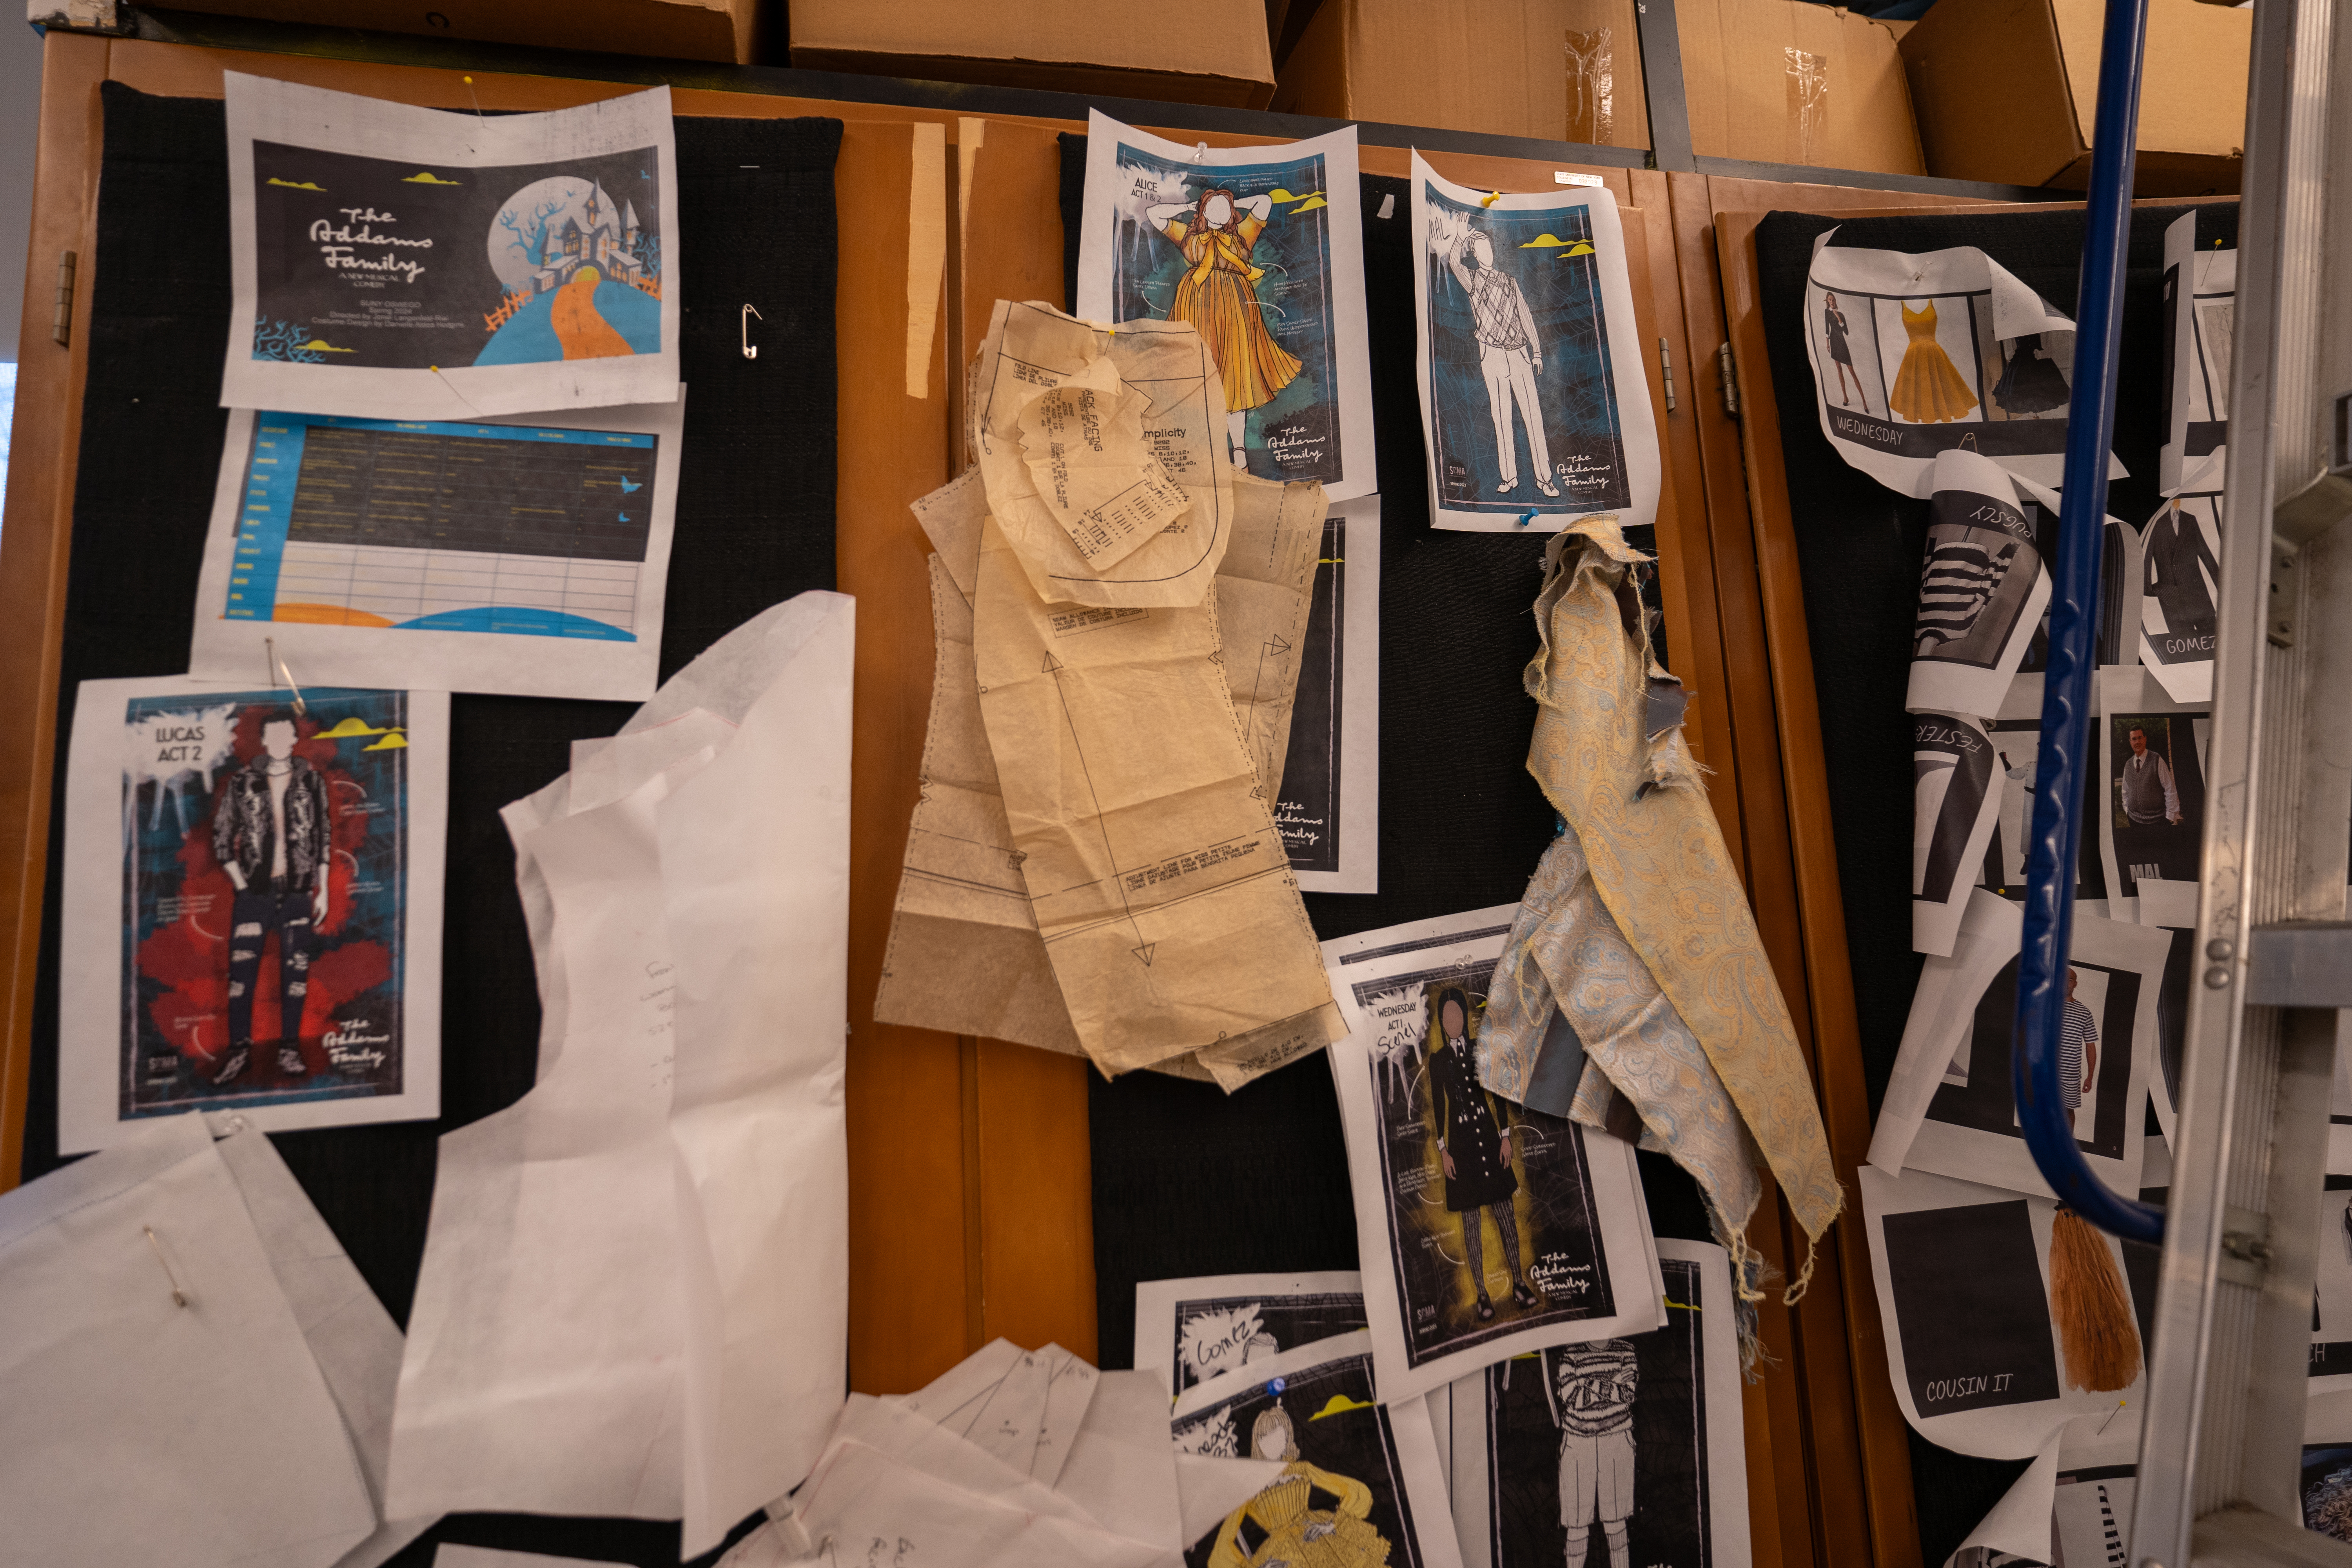 Displays and presentations in Tyler Hall during Quest included an exhibition of costume notes and behind-the-scenes insights for the recent campus production of “The Addams Family.”